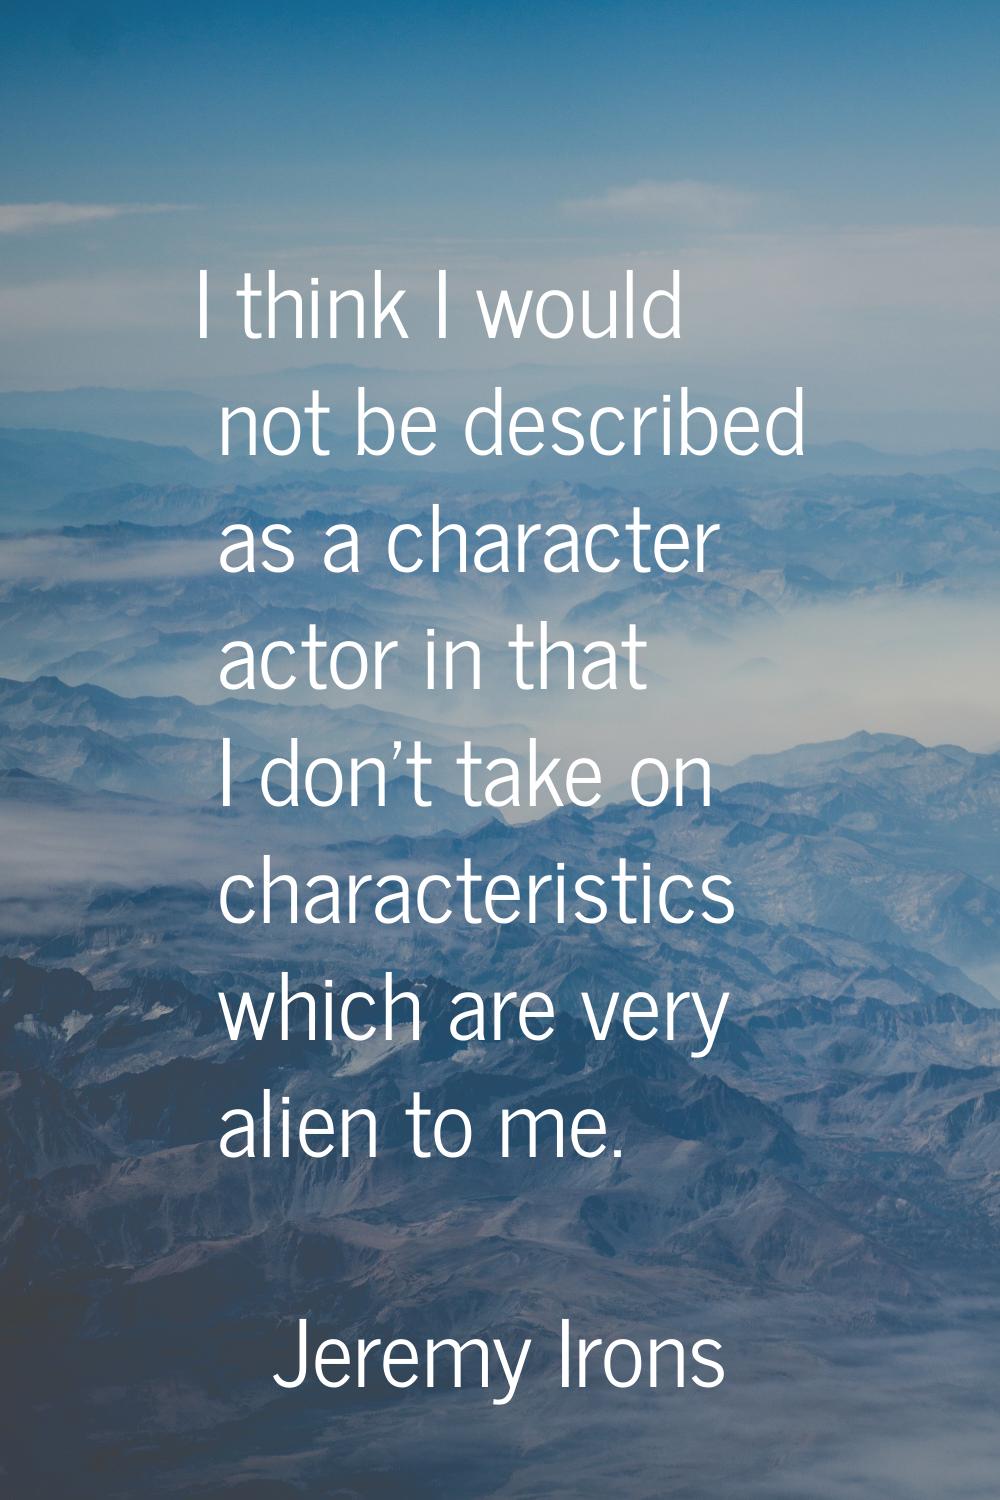 I think I would not be described as a character actor in that I don't take on characteristics which